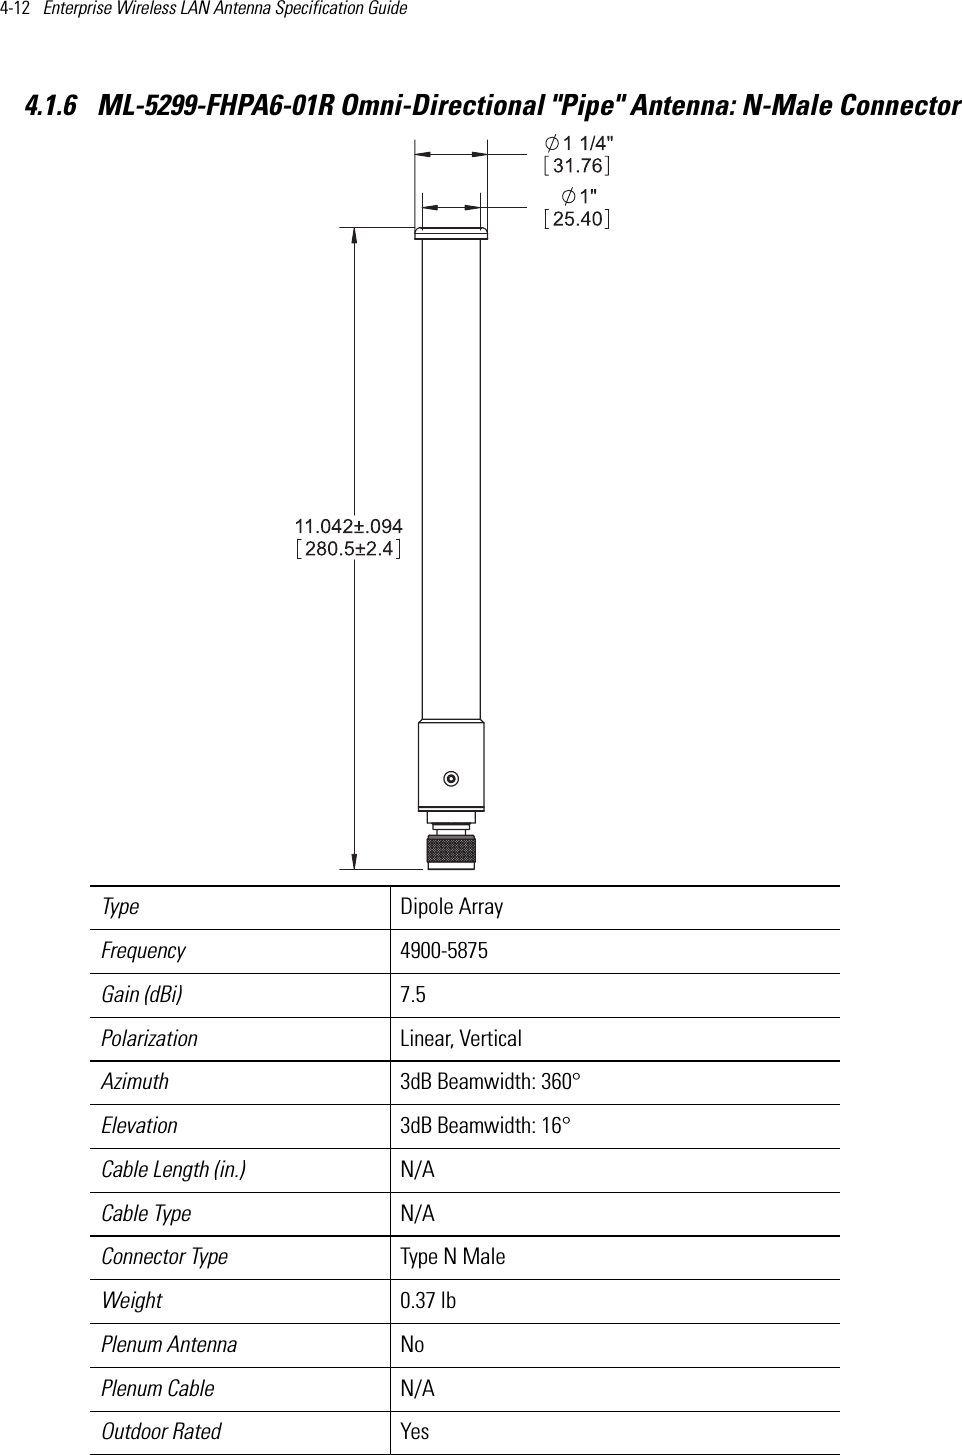 4-12   Enterprise Wireless LAN Antenna Specification Guide 4.1.6  ML-5299-FHPA6-01R Omni-Directional &quot;Pipe&quot; Antenna: N-Male Connector  Type Dipole ArrayFrequency 4900-5875Gain (dBi) 7.5Polarization Linear, VerticalAzimuth 3dB Beamwidth: 360°Elevation 3dB Beamwidth: 16°Cable Length (in.) N/ACable Type N/AConnector Type Type N MaleWeight 0.37 lbPlenum Antenna NoPlenum Cable N/AOutdoor Rated Yes